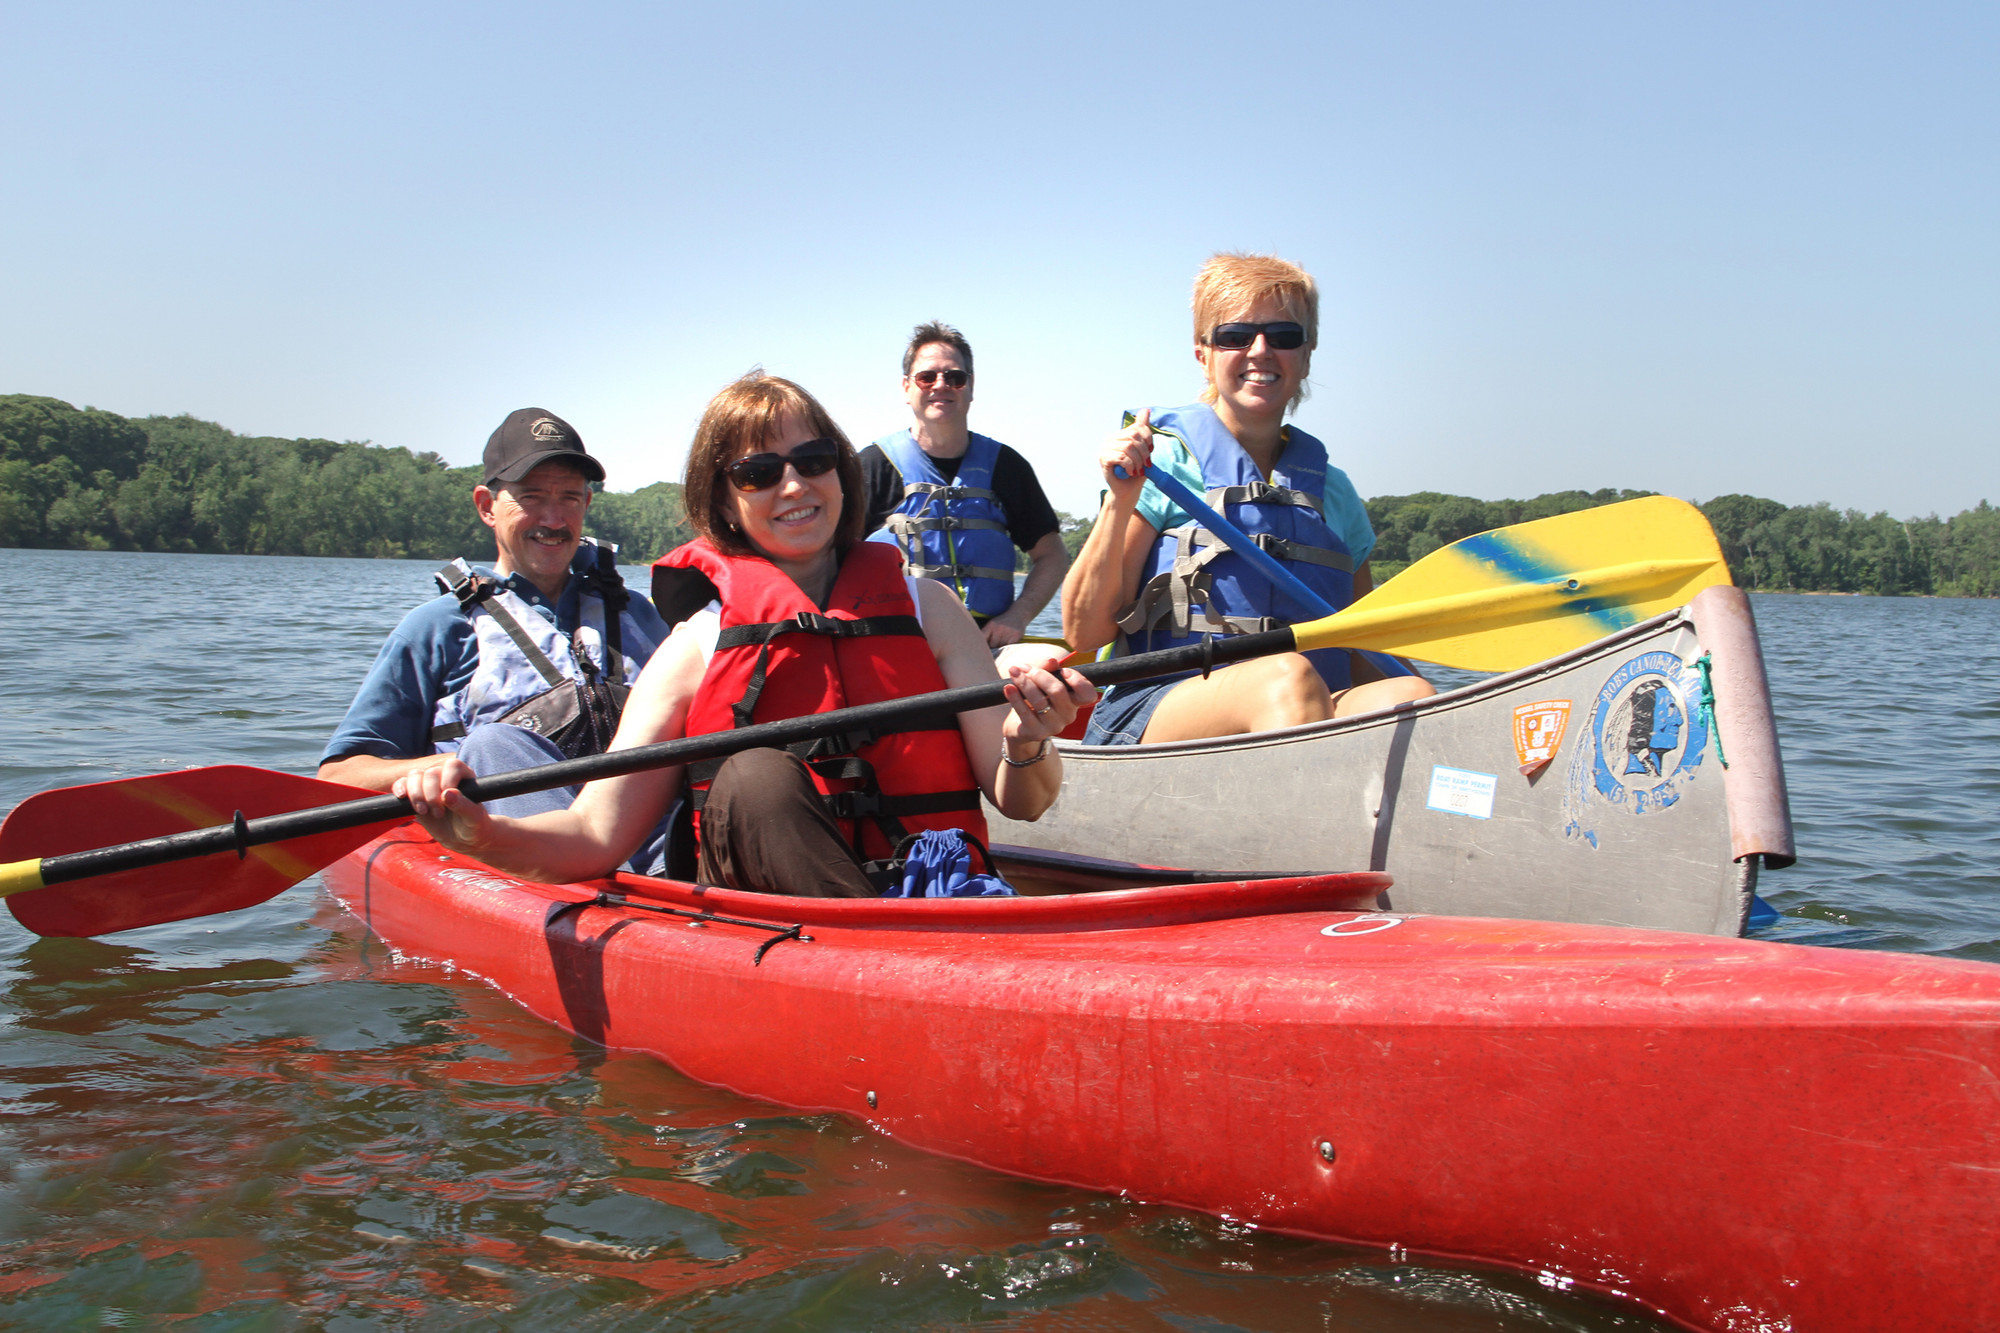 Gary and Cindy Reusch, left, with Dan and Chris O’Leary, enjoyed their time on the water.